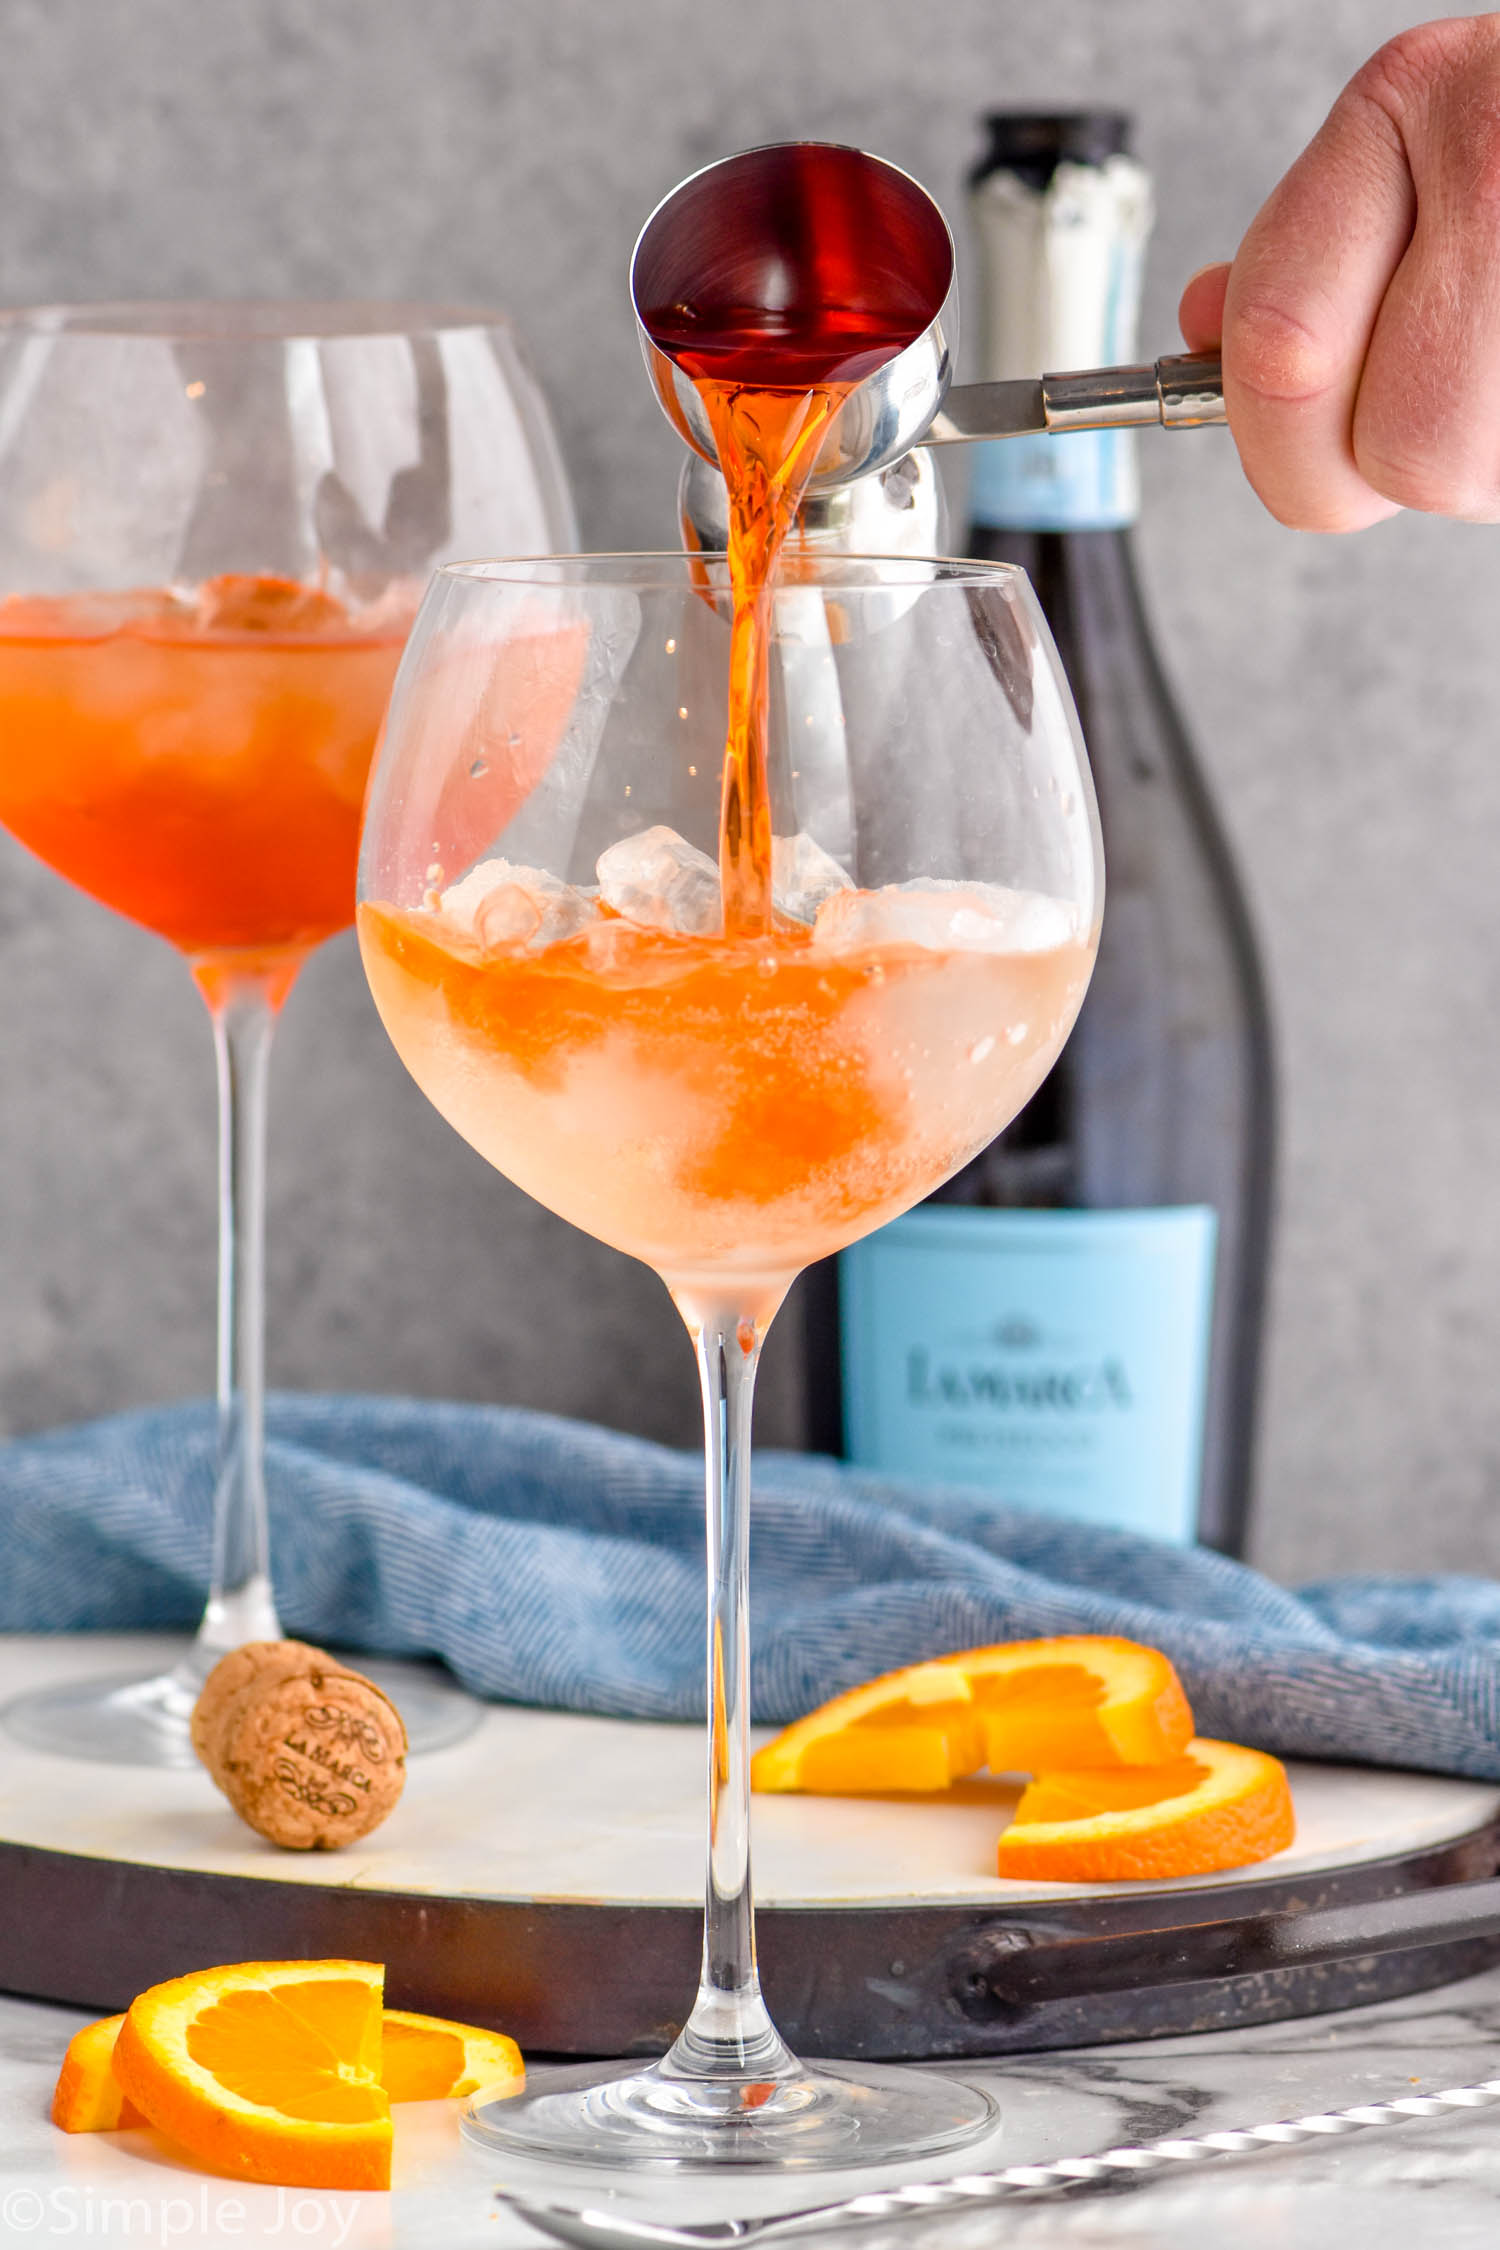 Photo of person's hand pouring ingredients for Aperol Spritz recipe into a glass. Bottle of sparkling wine and orange slices for garnish beside glasses